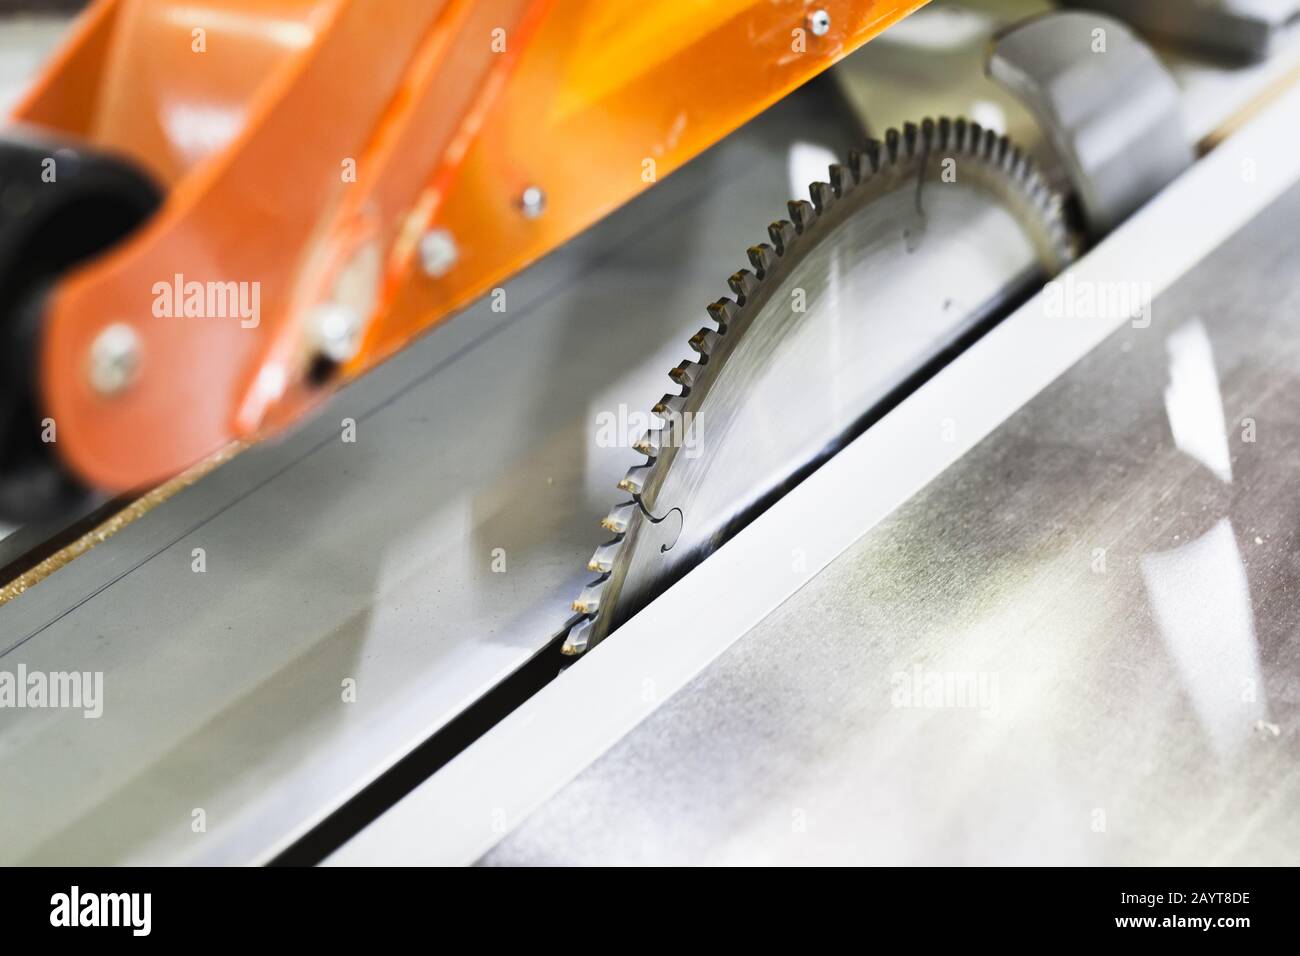 Industrial table saw, close-up photo with selective focus Stock Photo